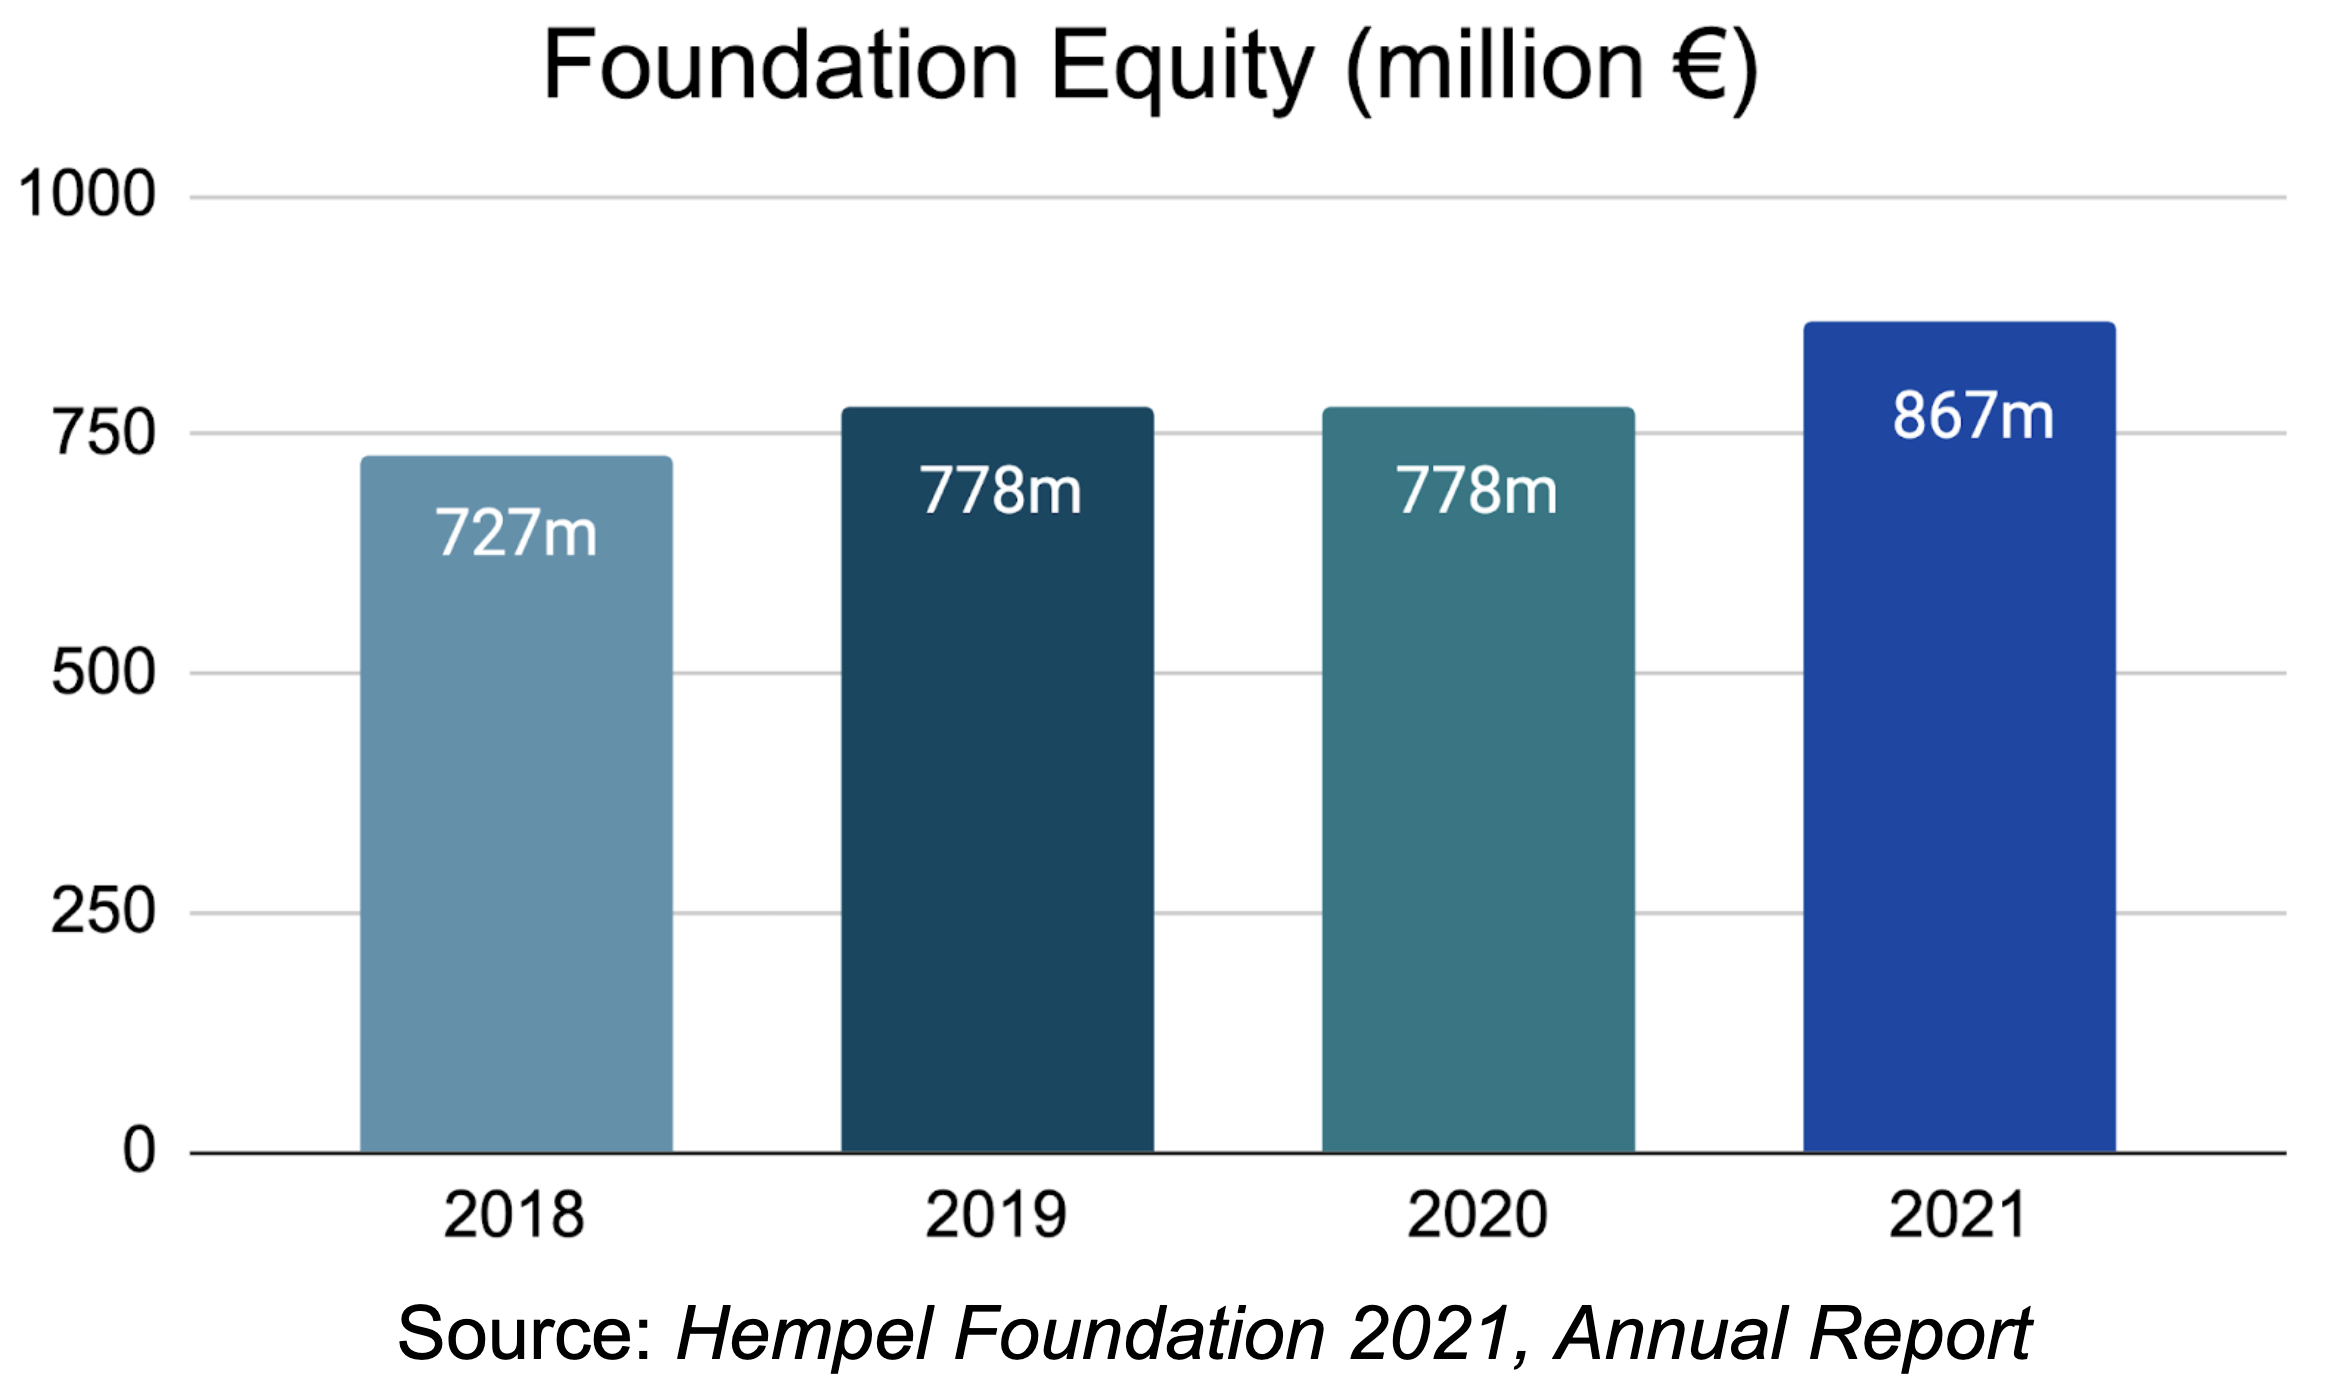 The Hempel Foundation: A Potential Partner For Your Organization